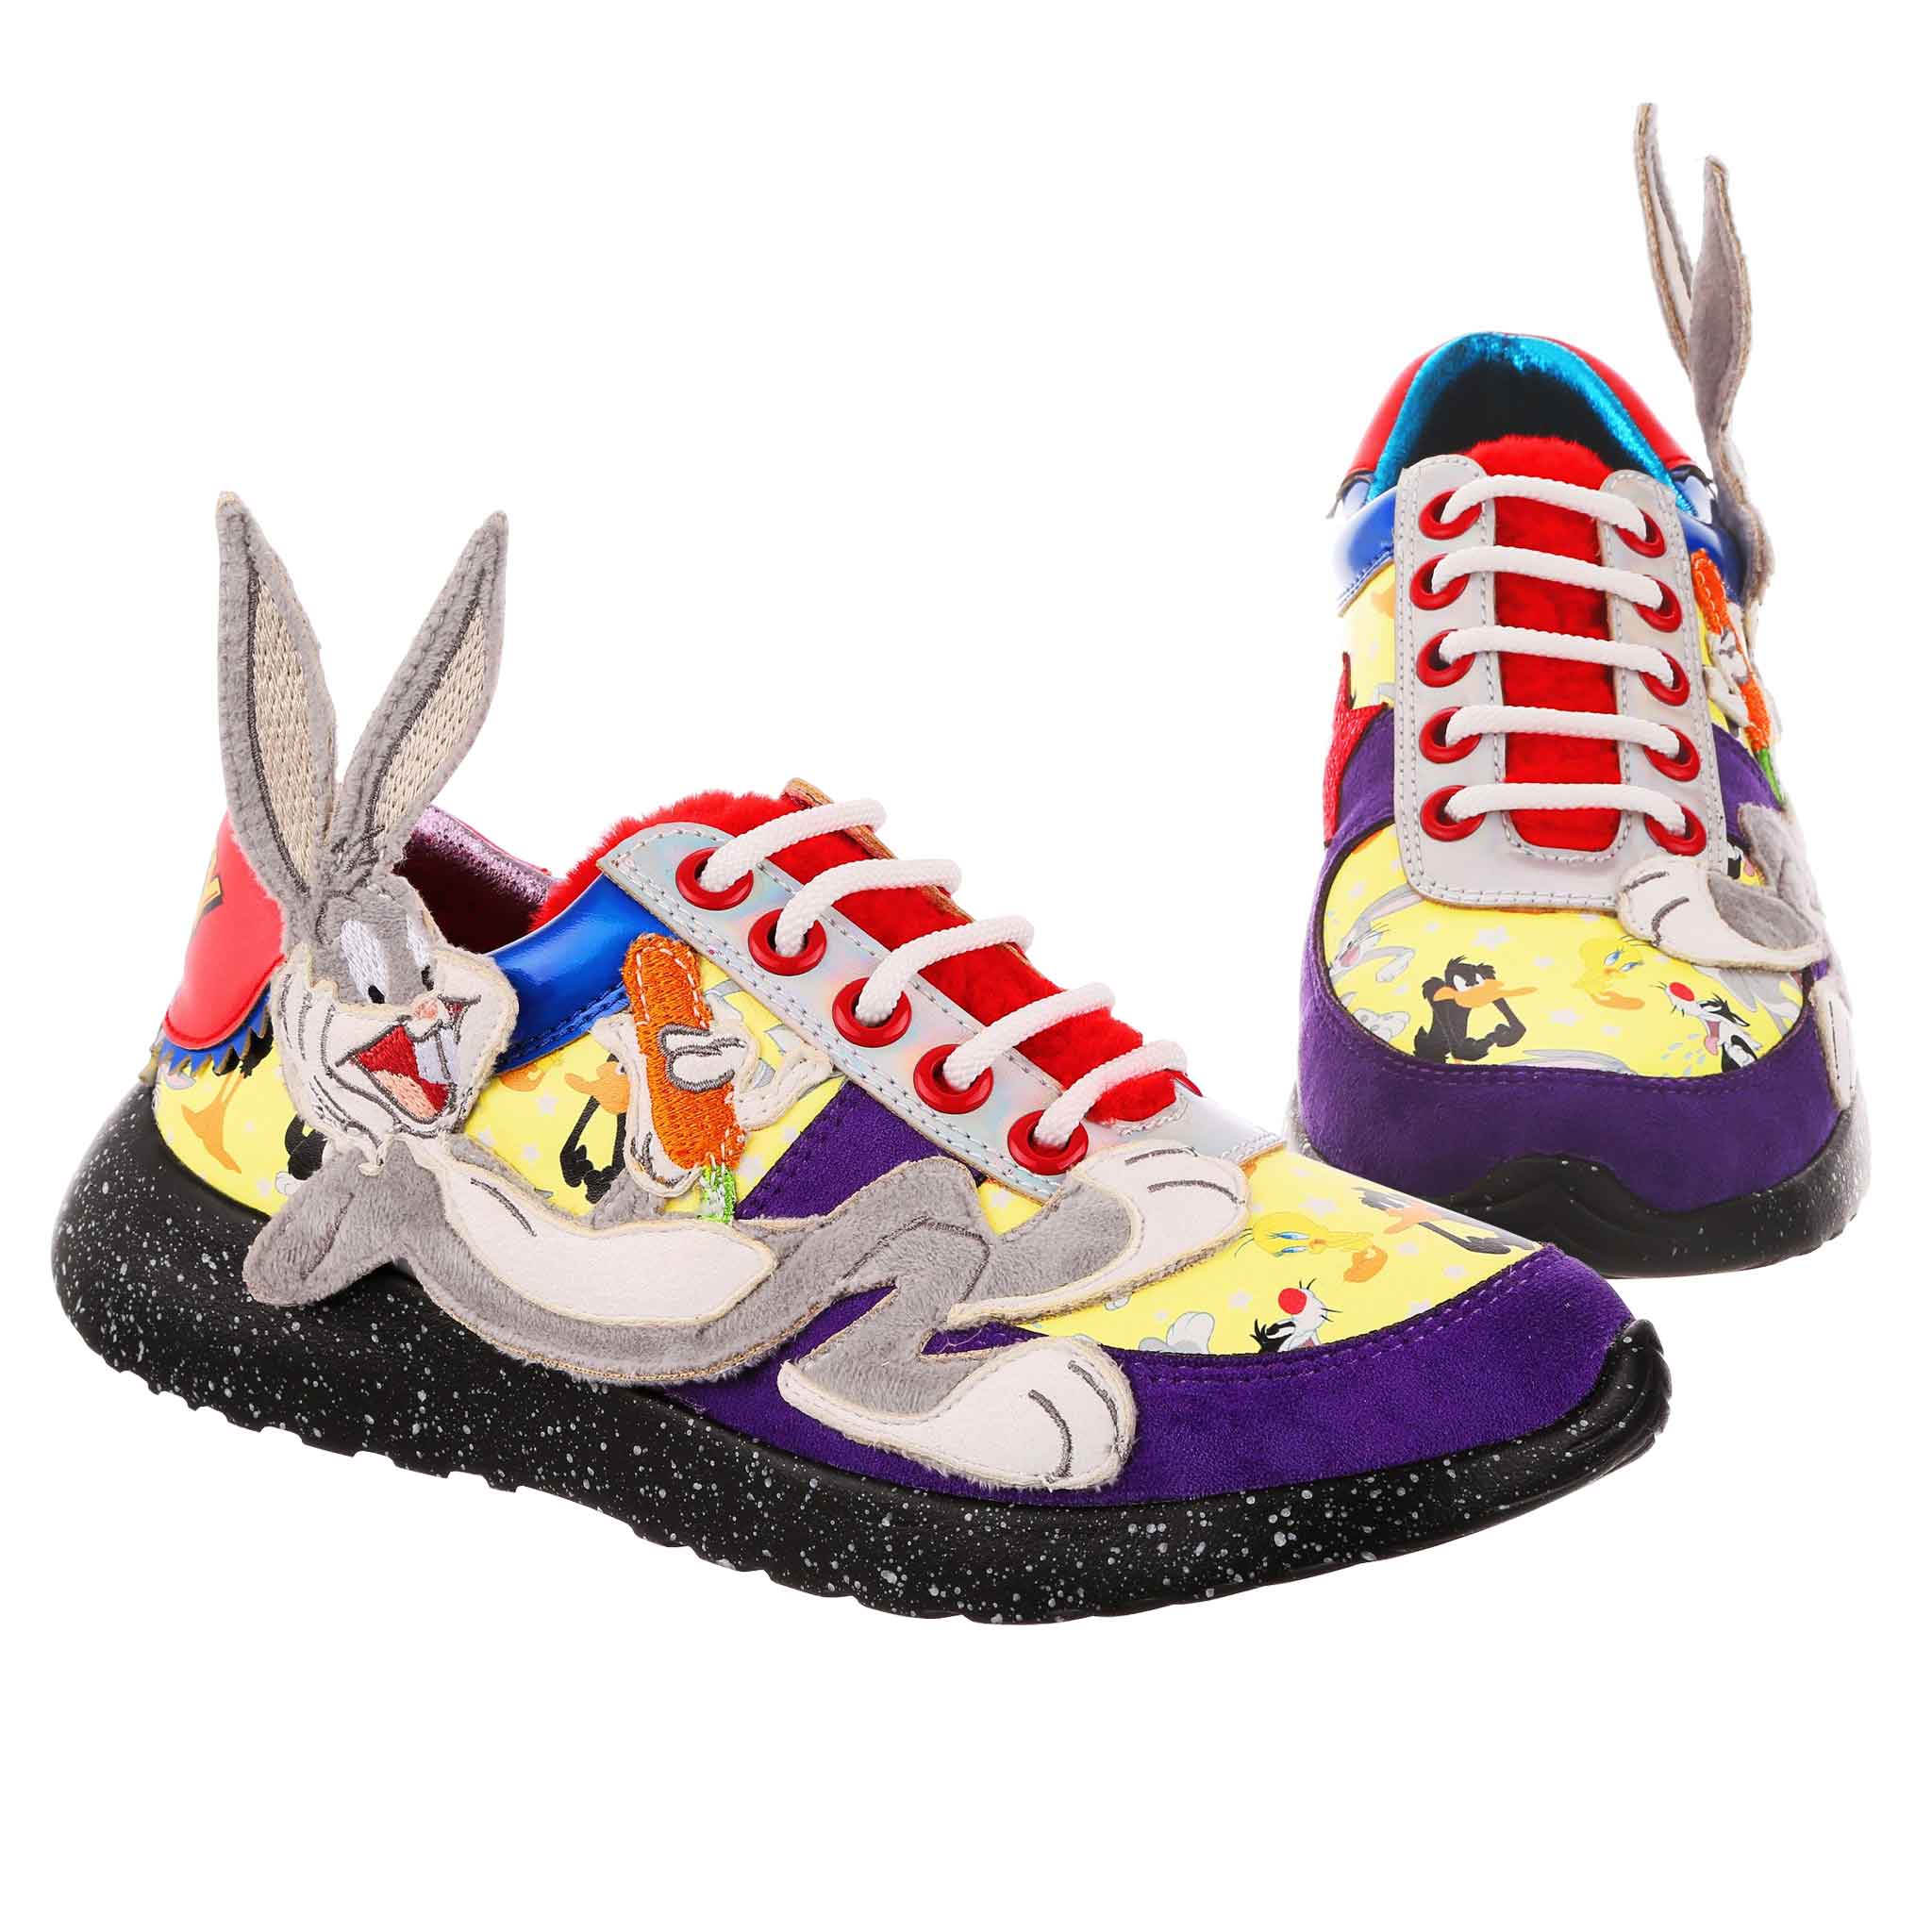 Lace-up trainers with purple suedette fabric, contrasted with yellow repeat pattern of popular Looney Tunes characters. A furry applique of Bugs Bunny lounging along the outside of the shoe, with his face and ears coming off of the shoe. A fluffy red tongue is matched to the logo printed on the heel.